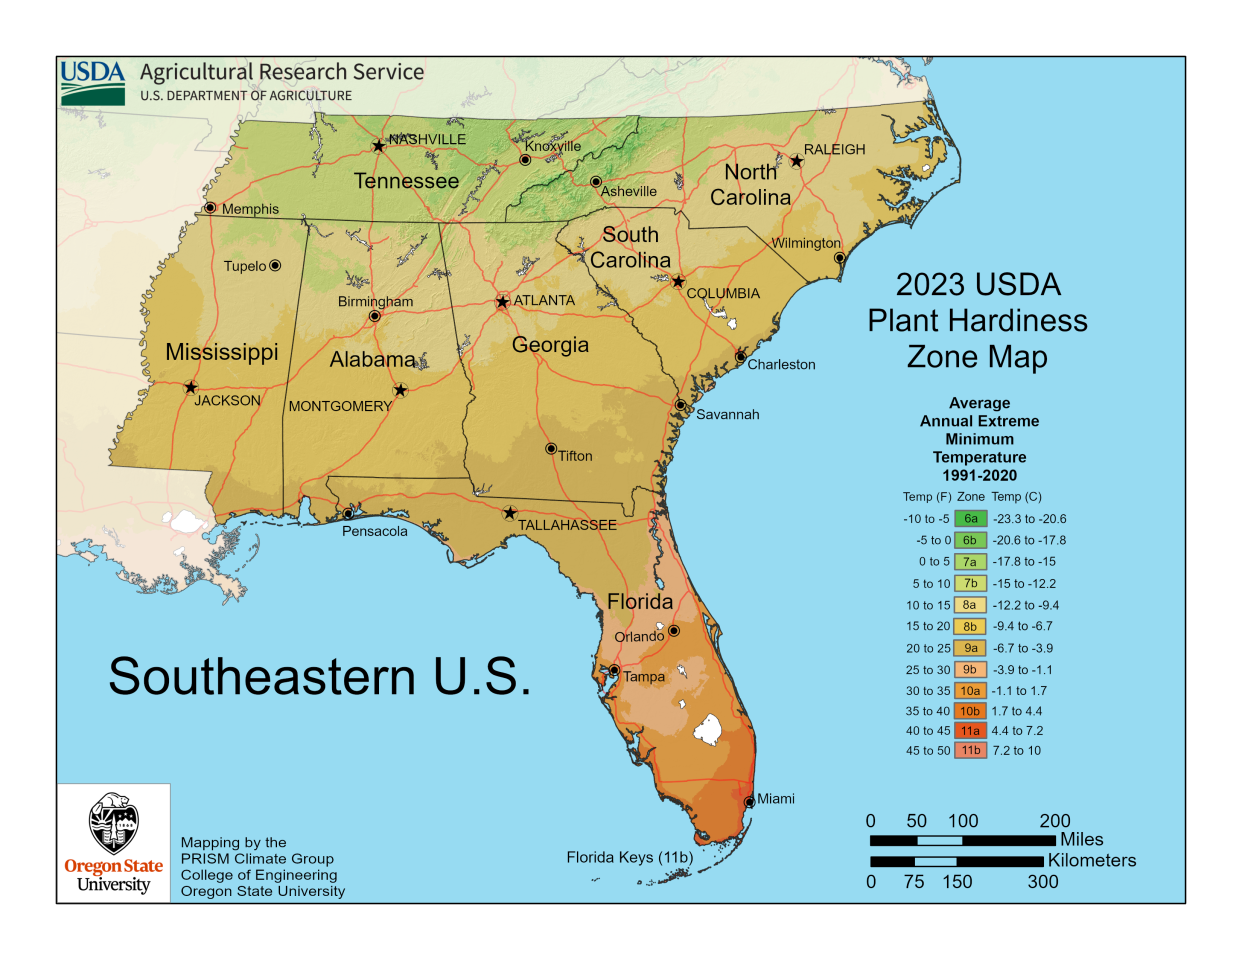 An updated plant hardiness zone map released by the USDA last month shows nearly half of the country is now classified in a "warmer" zone than it used to be. That includes parts of Southeastern N.C.